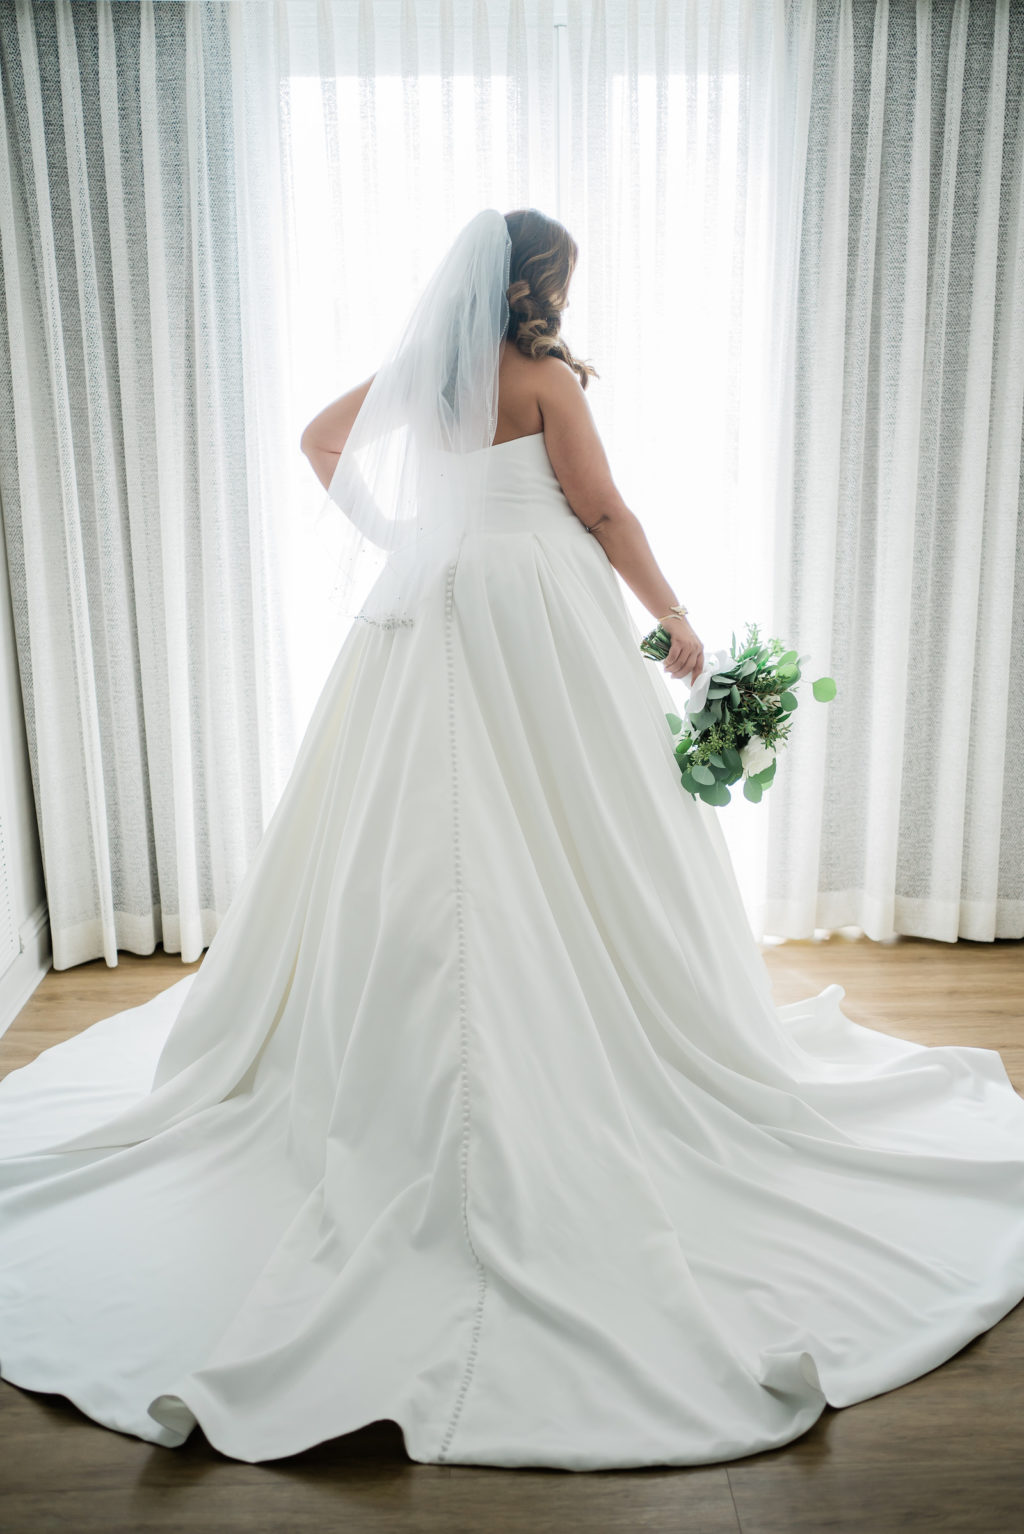 Ivory Private Collection Simple Classic Sweetheart Neckline Strapless A Line Wedding Dress Bridal Gown with Buttons and Pockets by Truly Forever Bridal Tampa | Eucalyptus Greenery and White Rose Bridal Bouquet